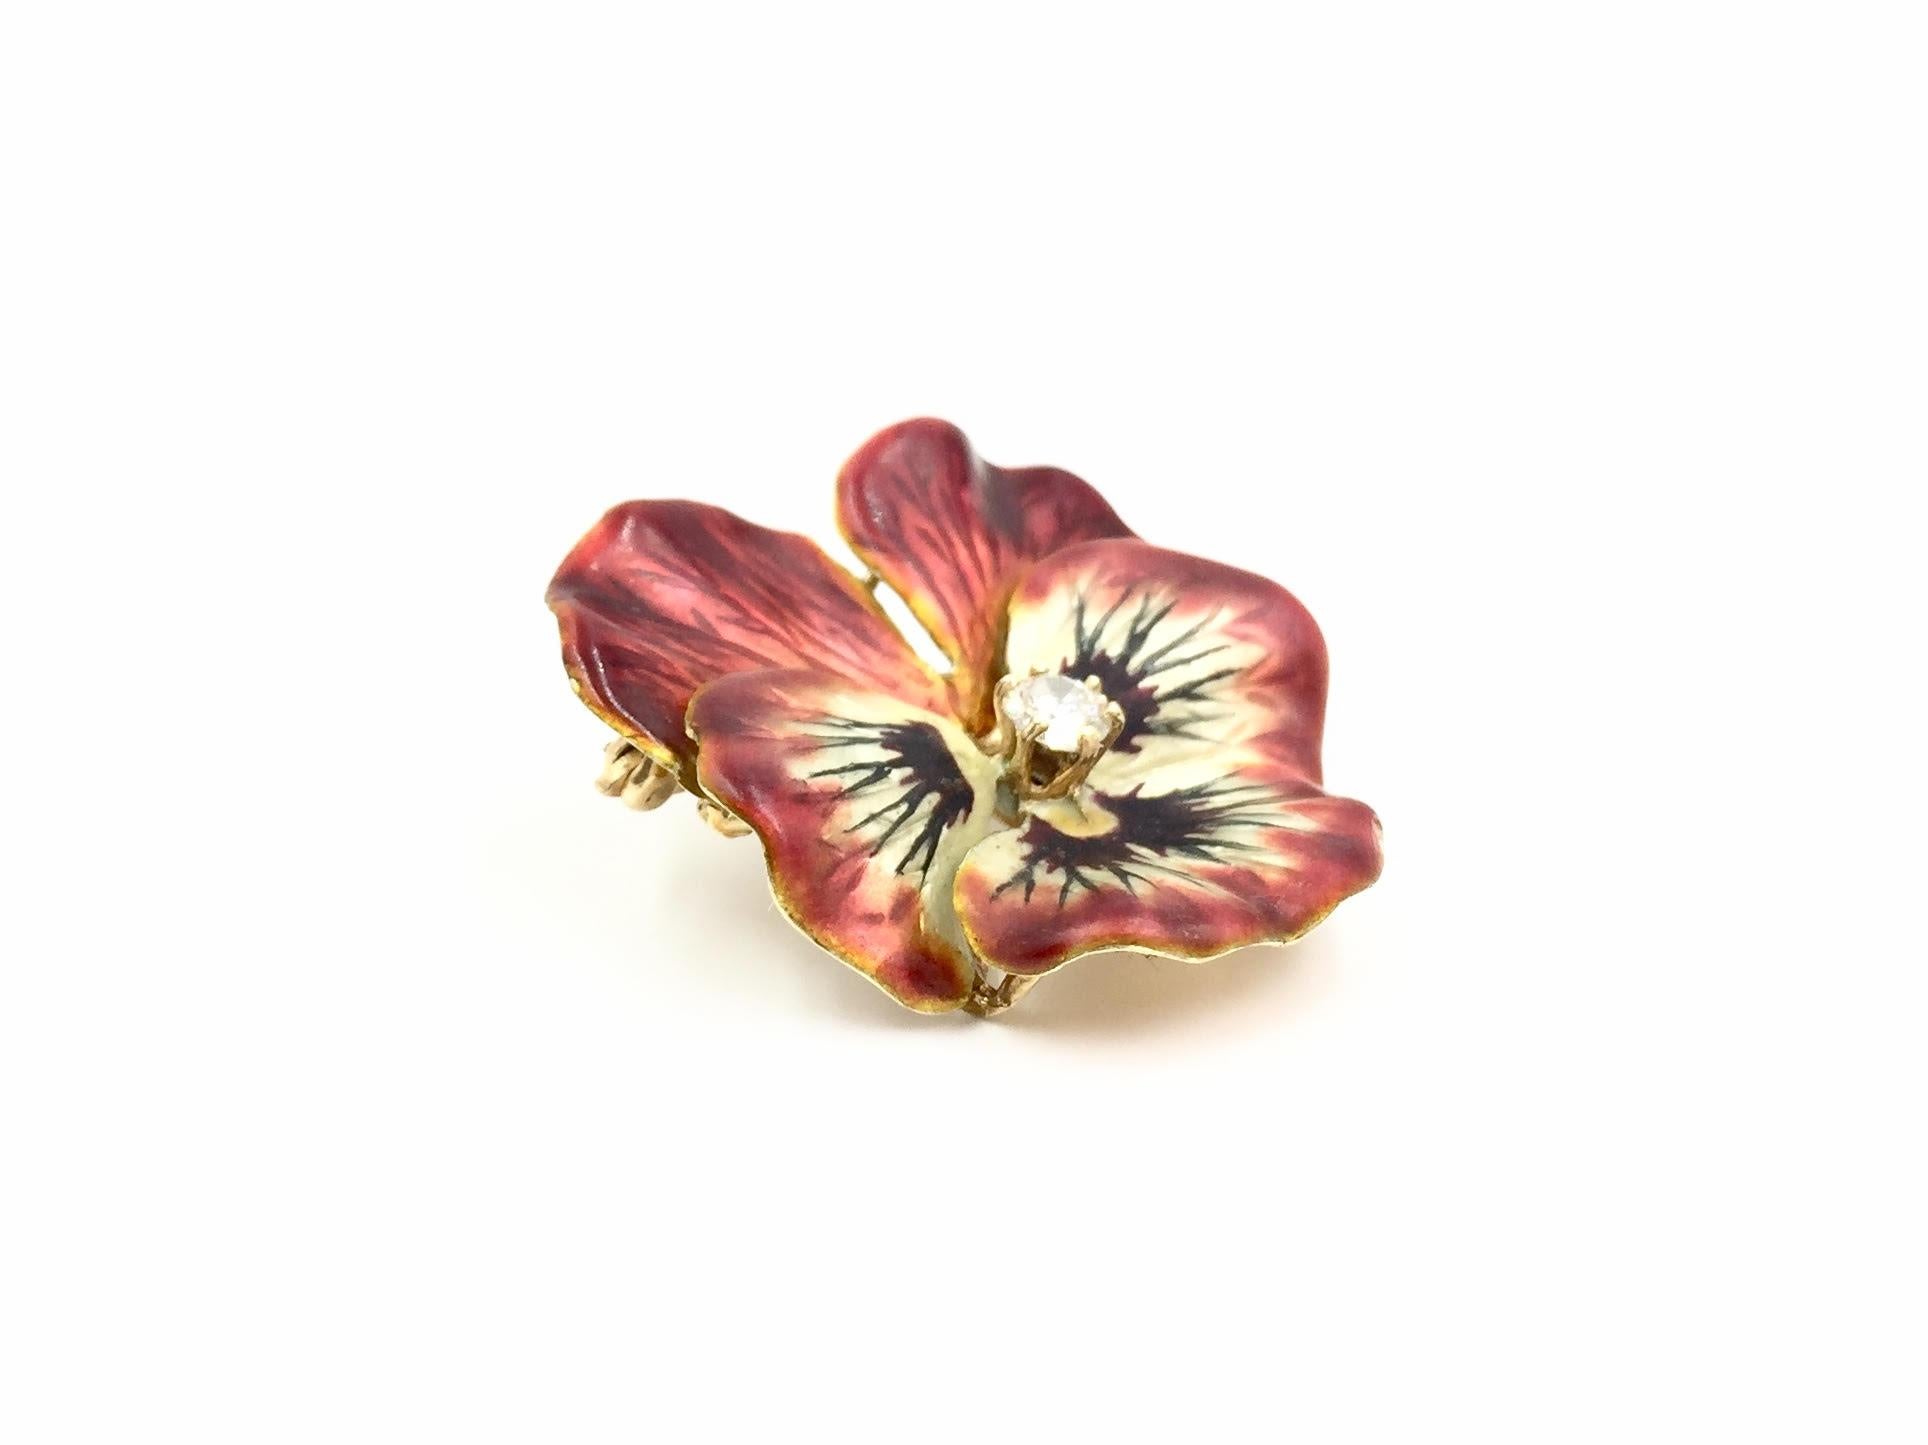 Circa 1950, this 14 karat yellow gold pansy flower brooch doubles as a pendant with a collapsible bale. Pansy features an approximate .25 carat round brilliant diamond at approximately H color, I1 clarity. Hand painted enamel has exquisite detail